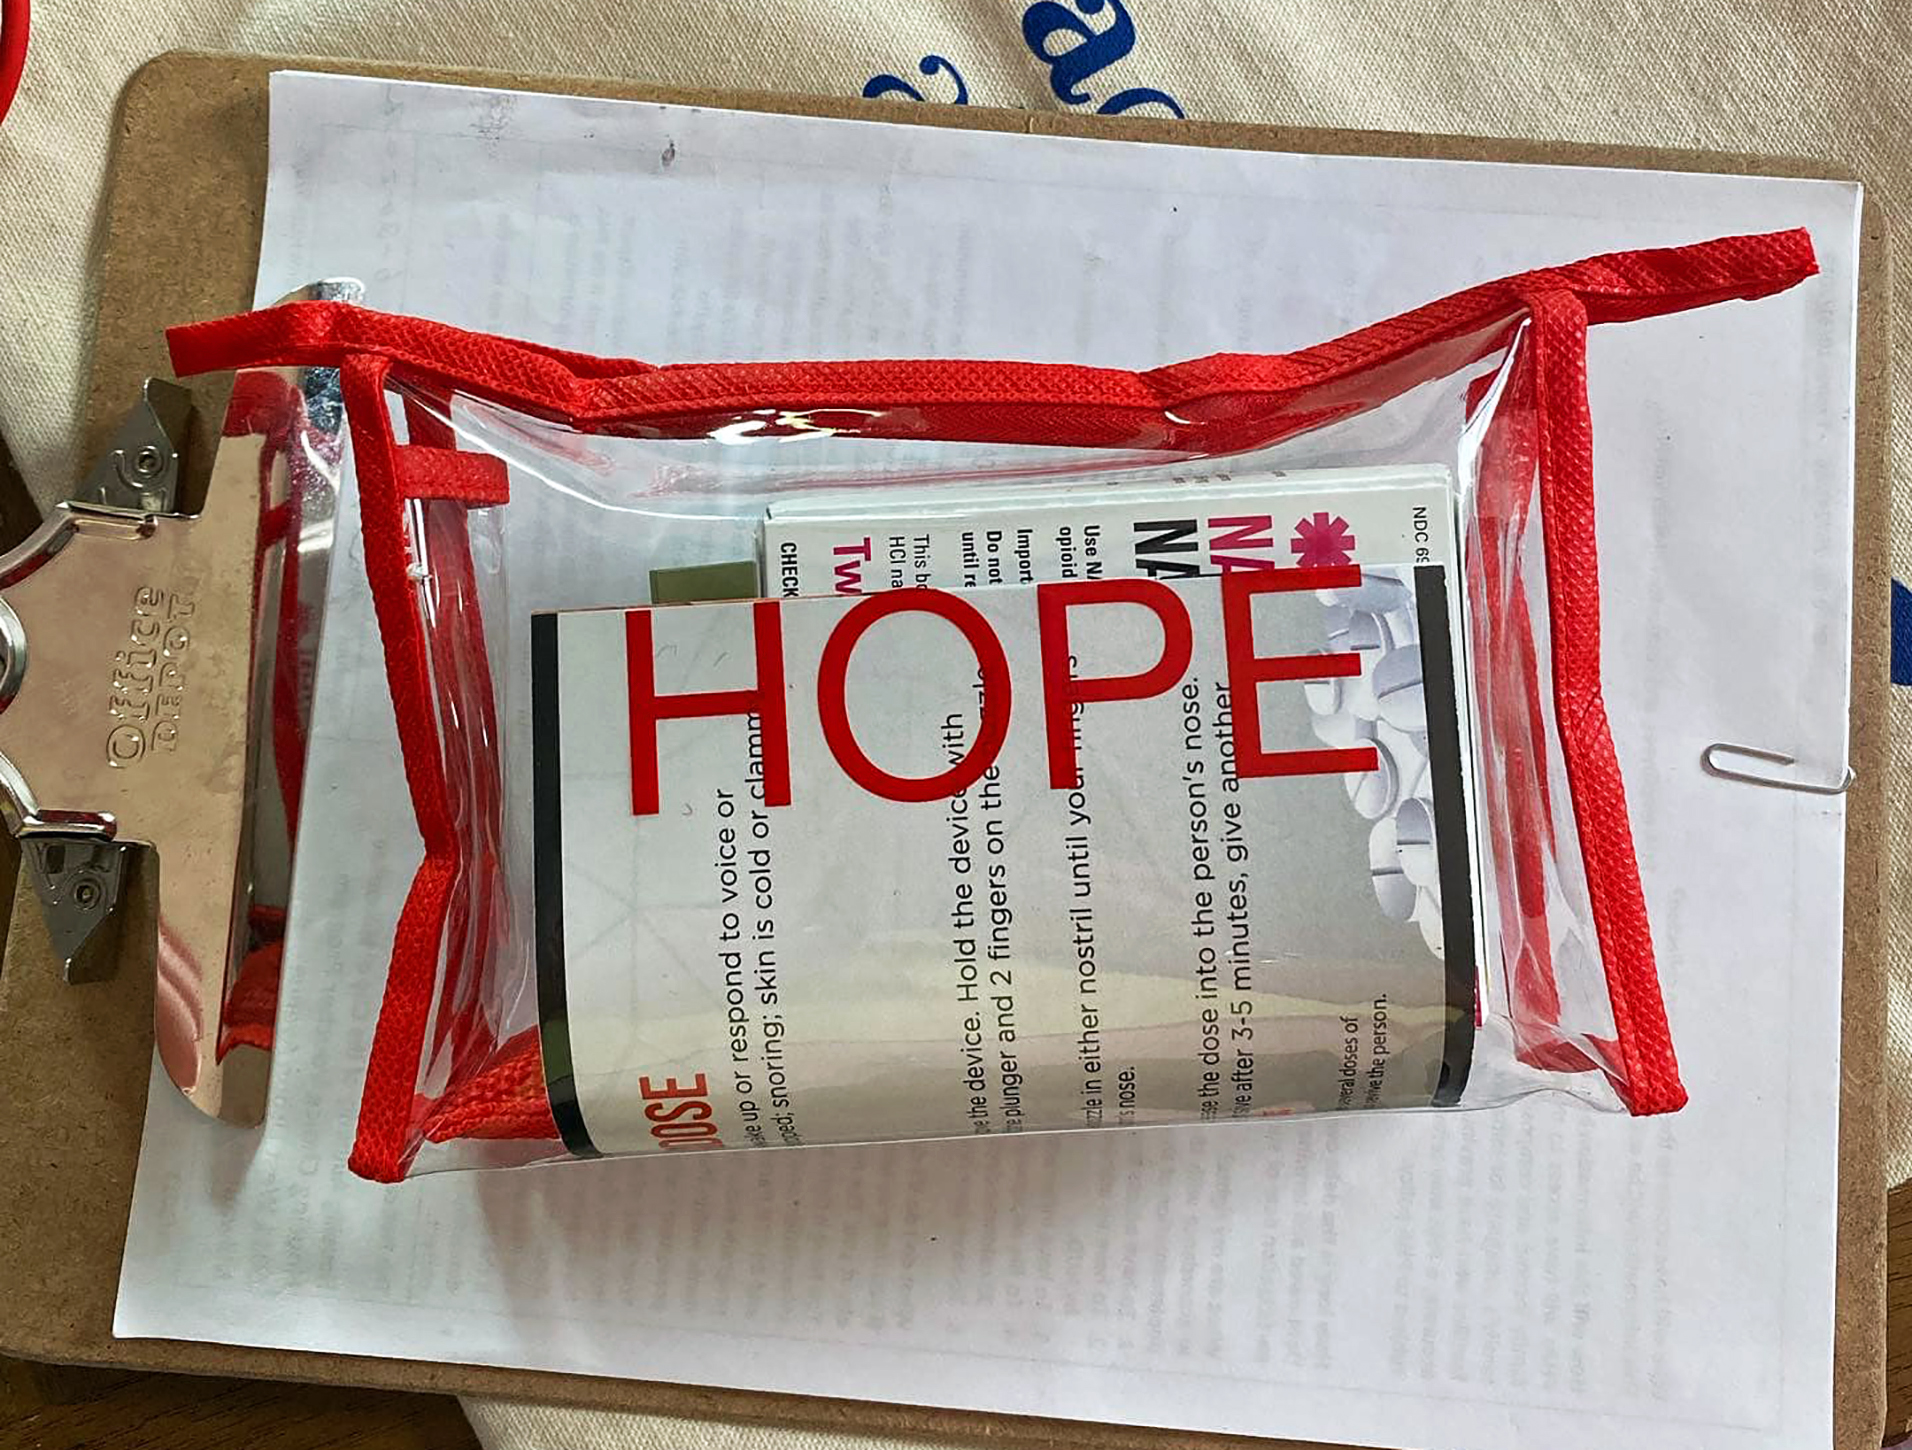 Hope kits are meant to reduce drug overdoses in Milwaukee.